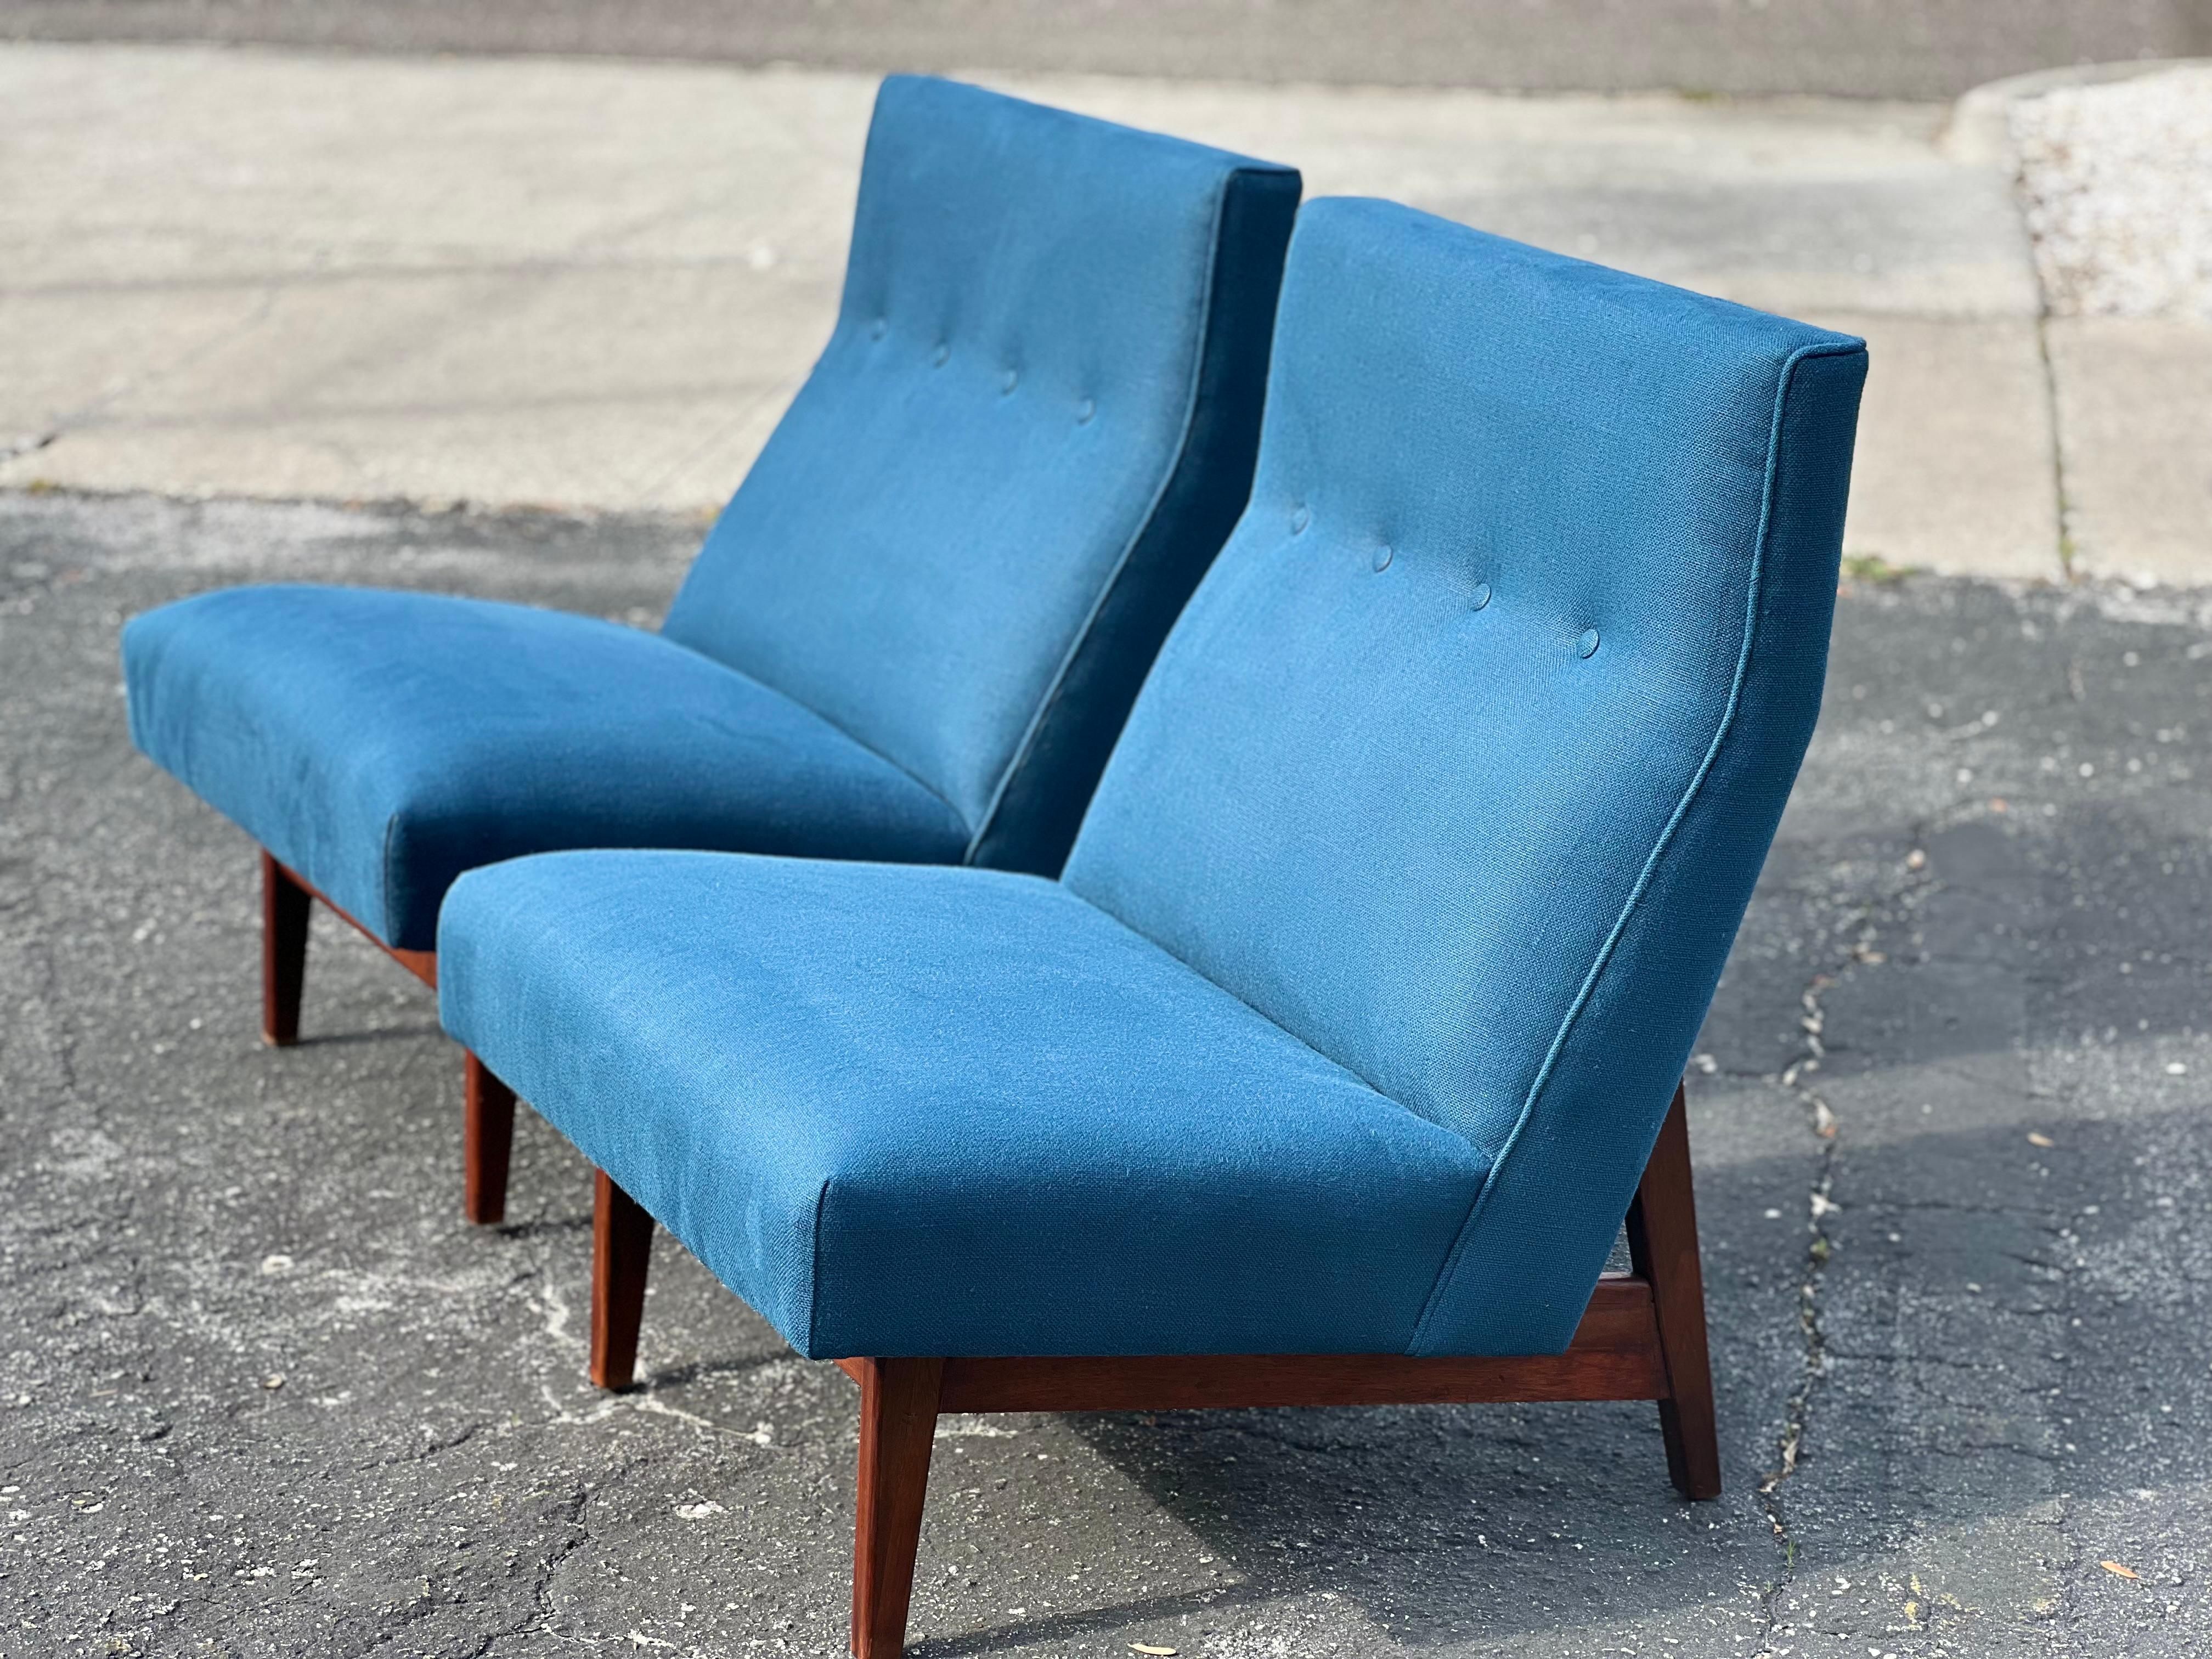 A pair of classic slipper or armless chairs by Jens Risom-original, vintage 1950's production. Walnut frames have a beautiful patina, newly reupholstered in Brunschwig & Fils linen, woven in Belgium. The color is 